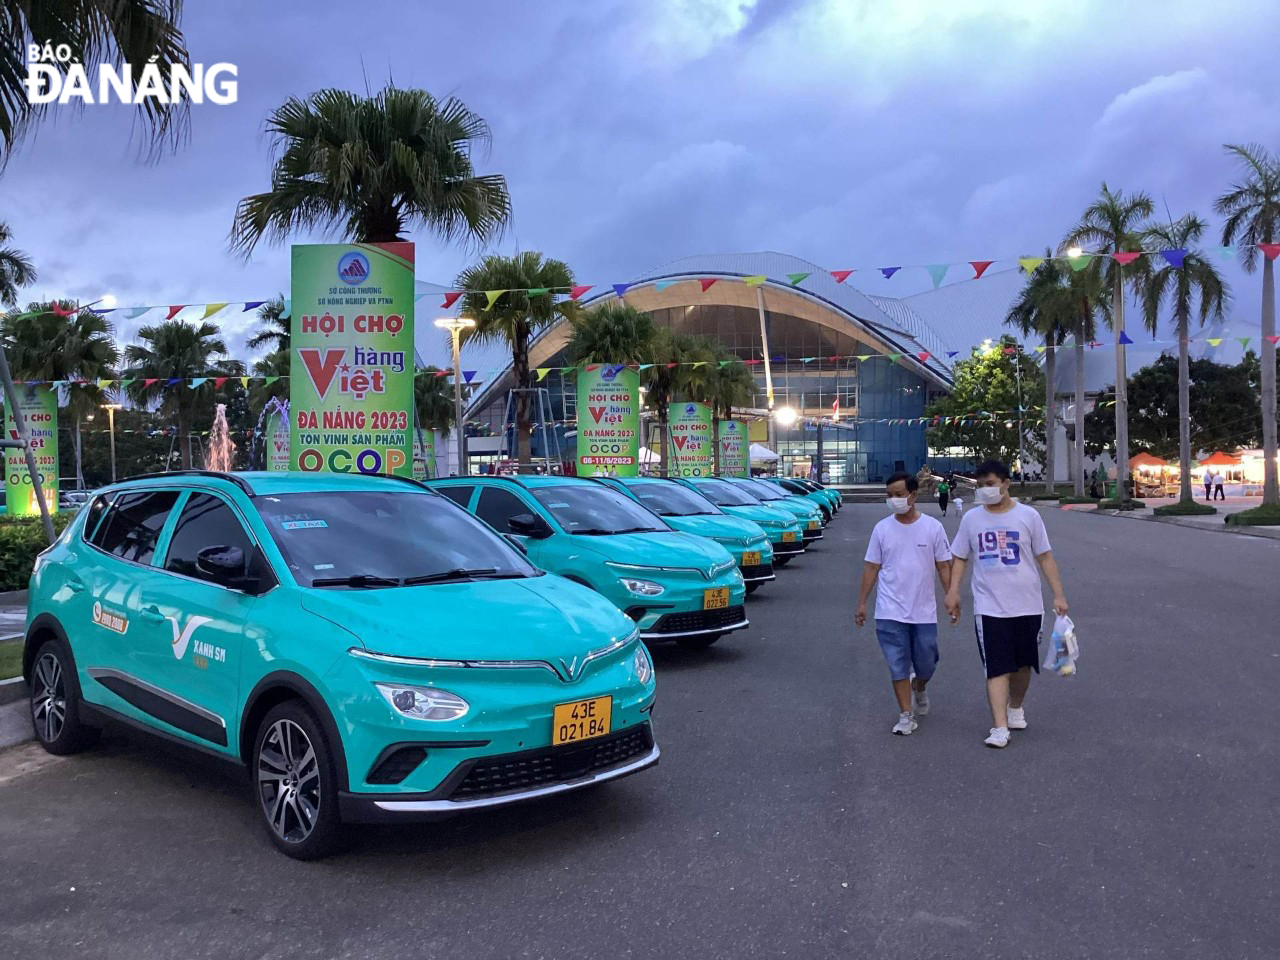 Electric taxis available in Da Nang are about to be put into operation.